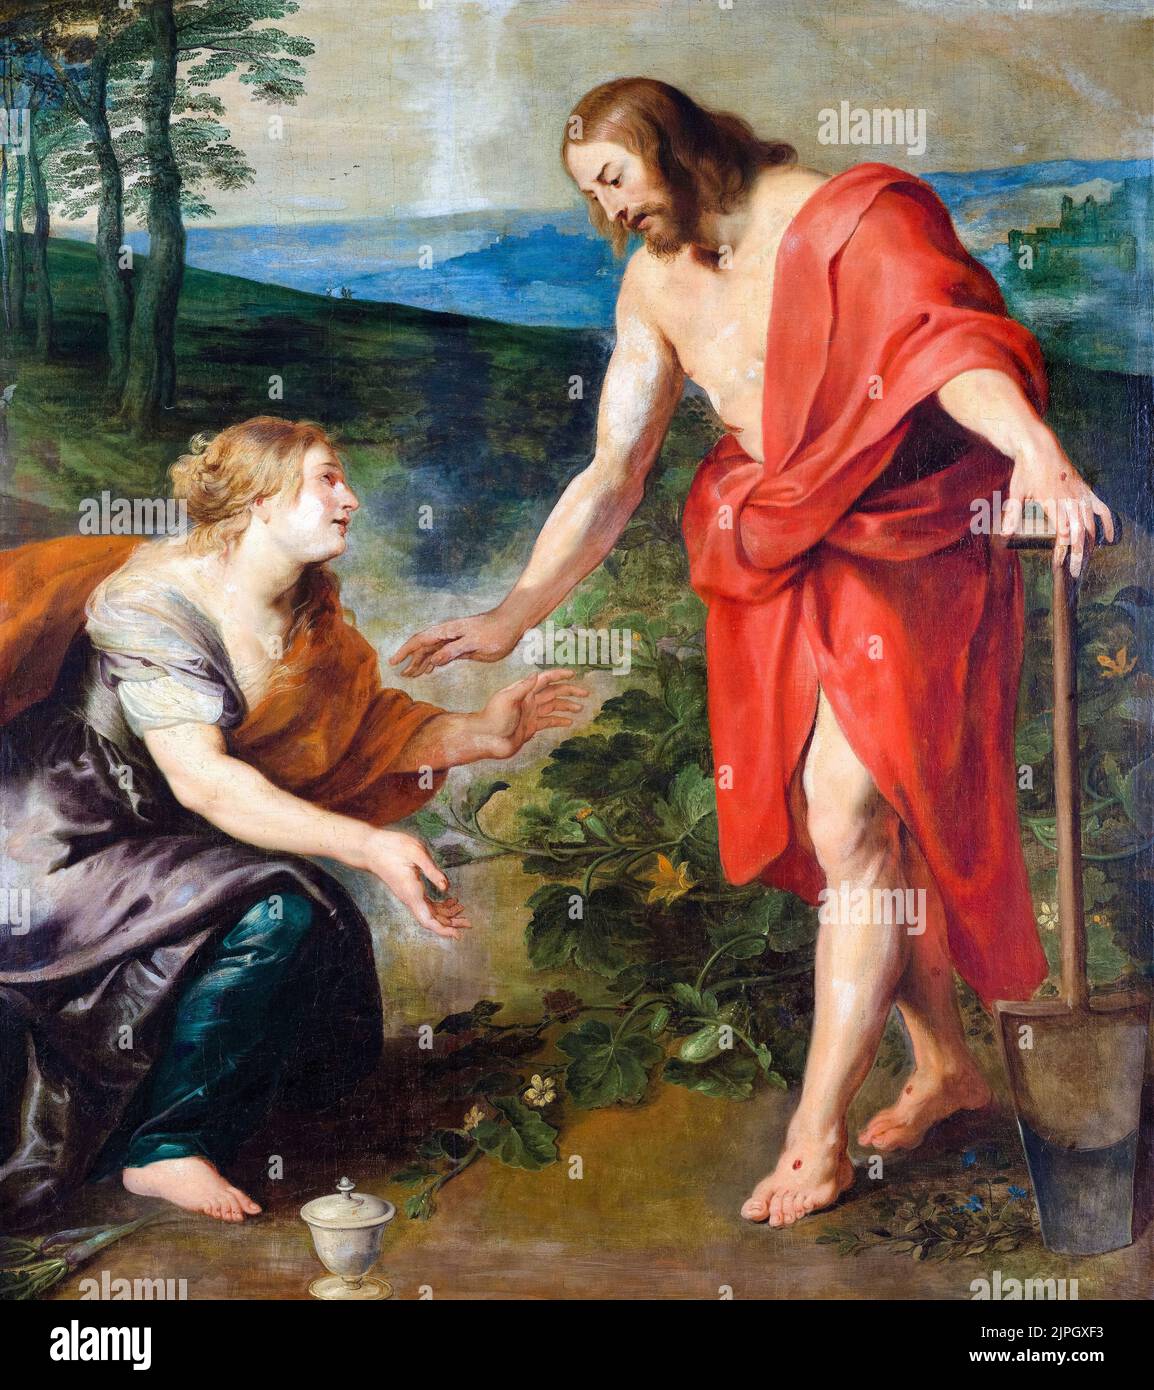 Christ Appearing to Mary Magdalen as a Gardener (Noli me Tangere), painting in oil on canvas by Peter Paul Rubens (and workshop), 1615-1618 Stock Photo